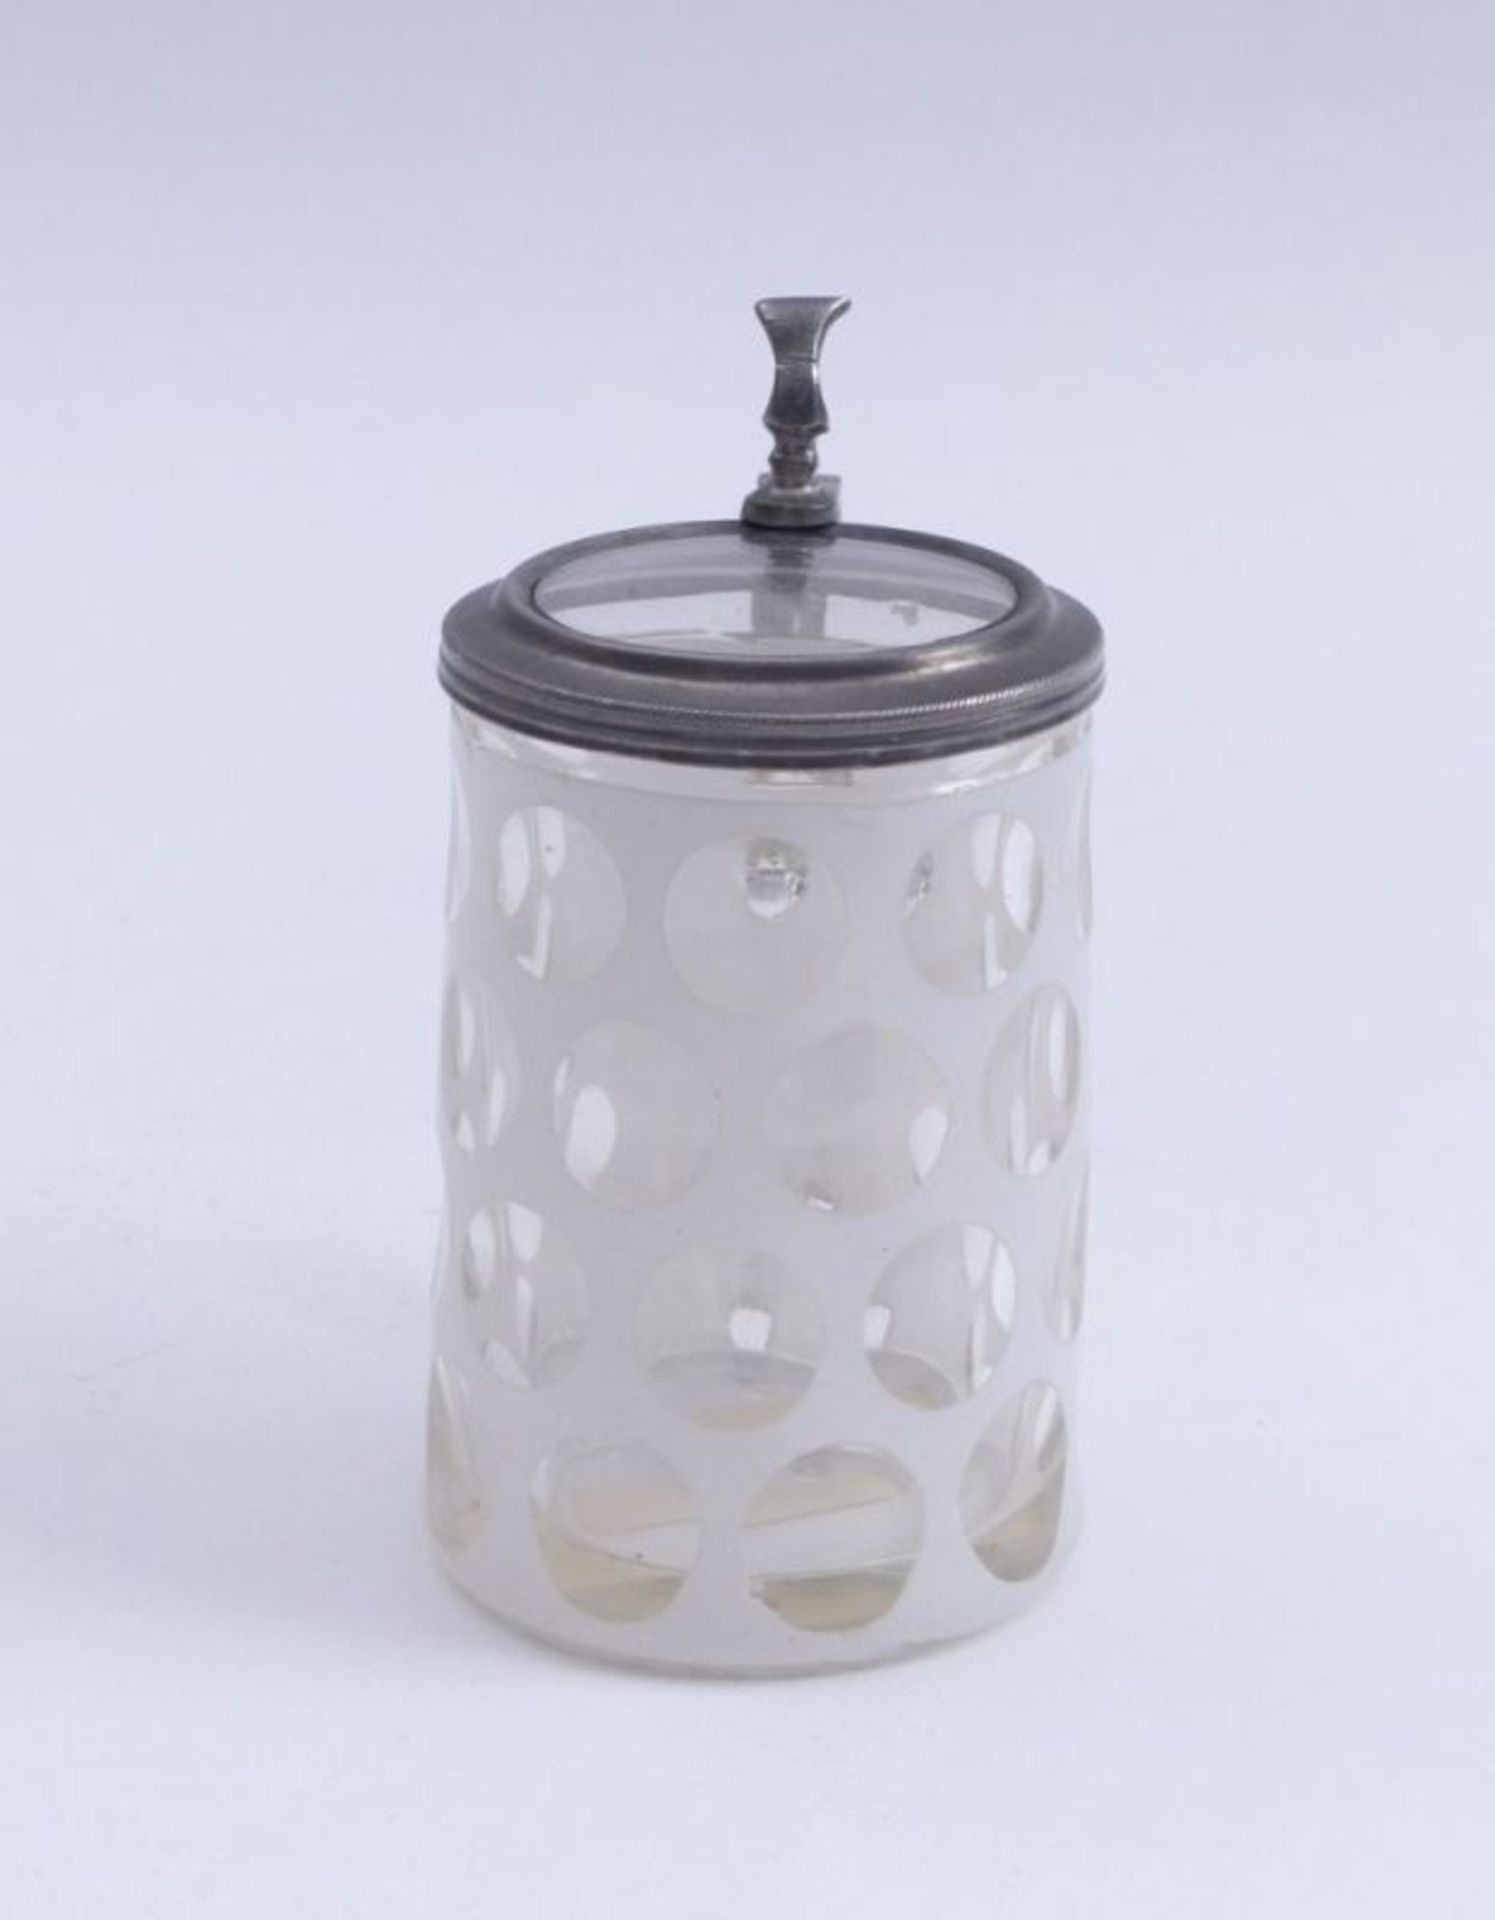 Small Biedermeier tankardBohemia, mid 19th c.With lens-cut decoration. Clear glass, white overlay, - Image 2 of 2